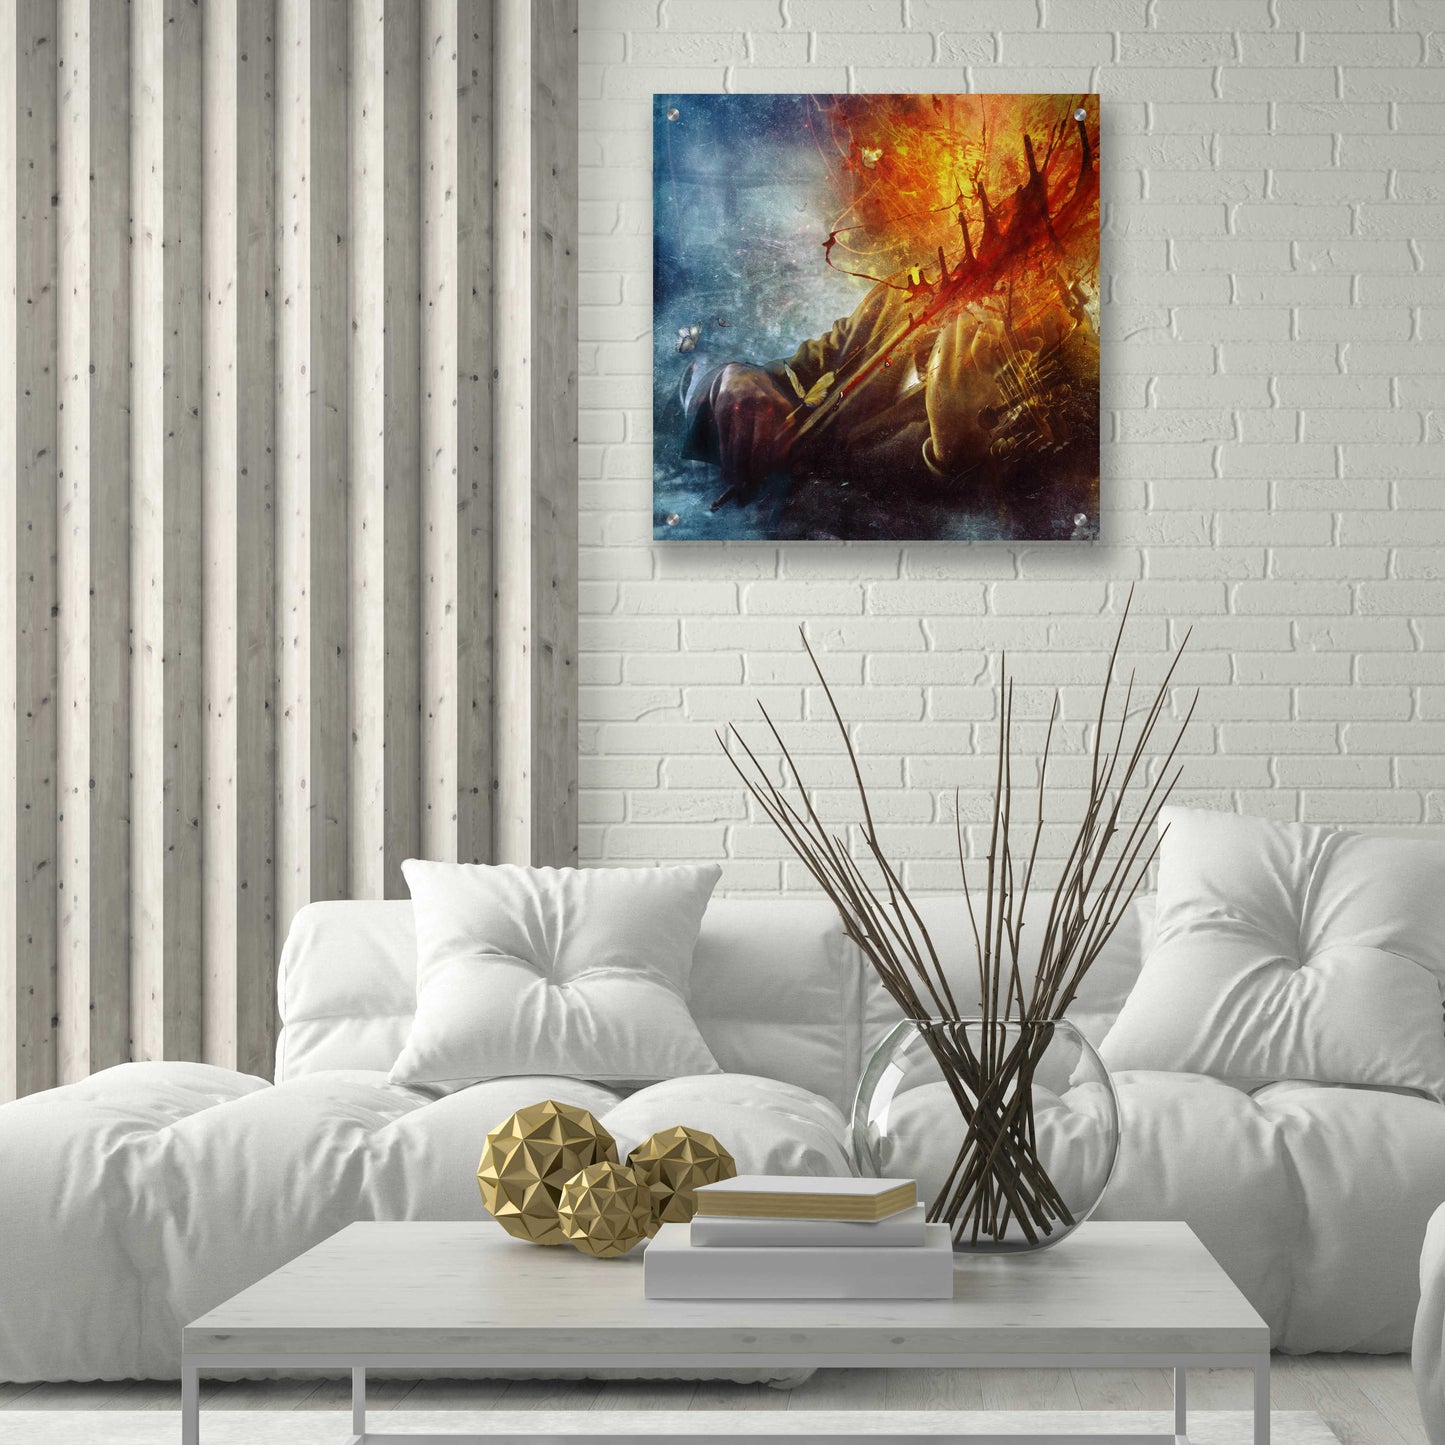 Epic Art 'A Look Into The Abyss' by Mario Sanchez Nevado, Acrylic Glass Wall Art,24x24